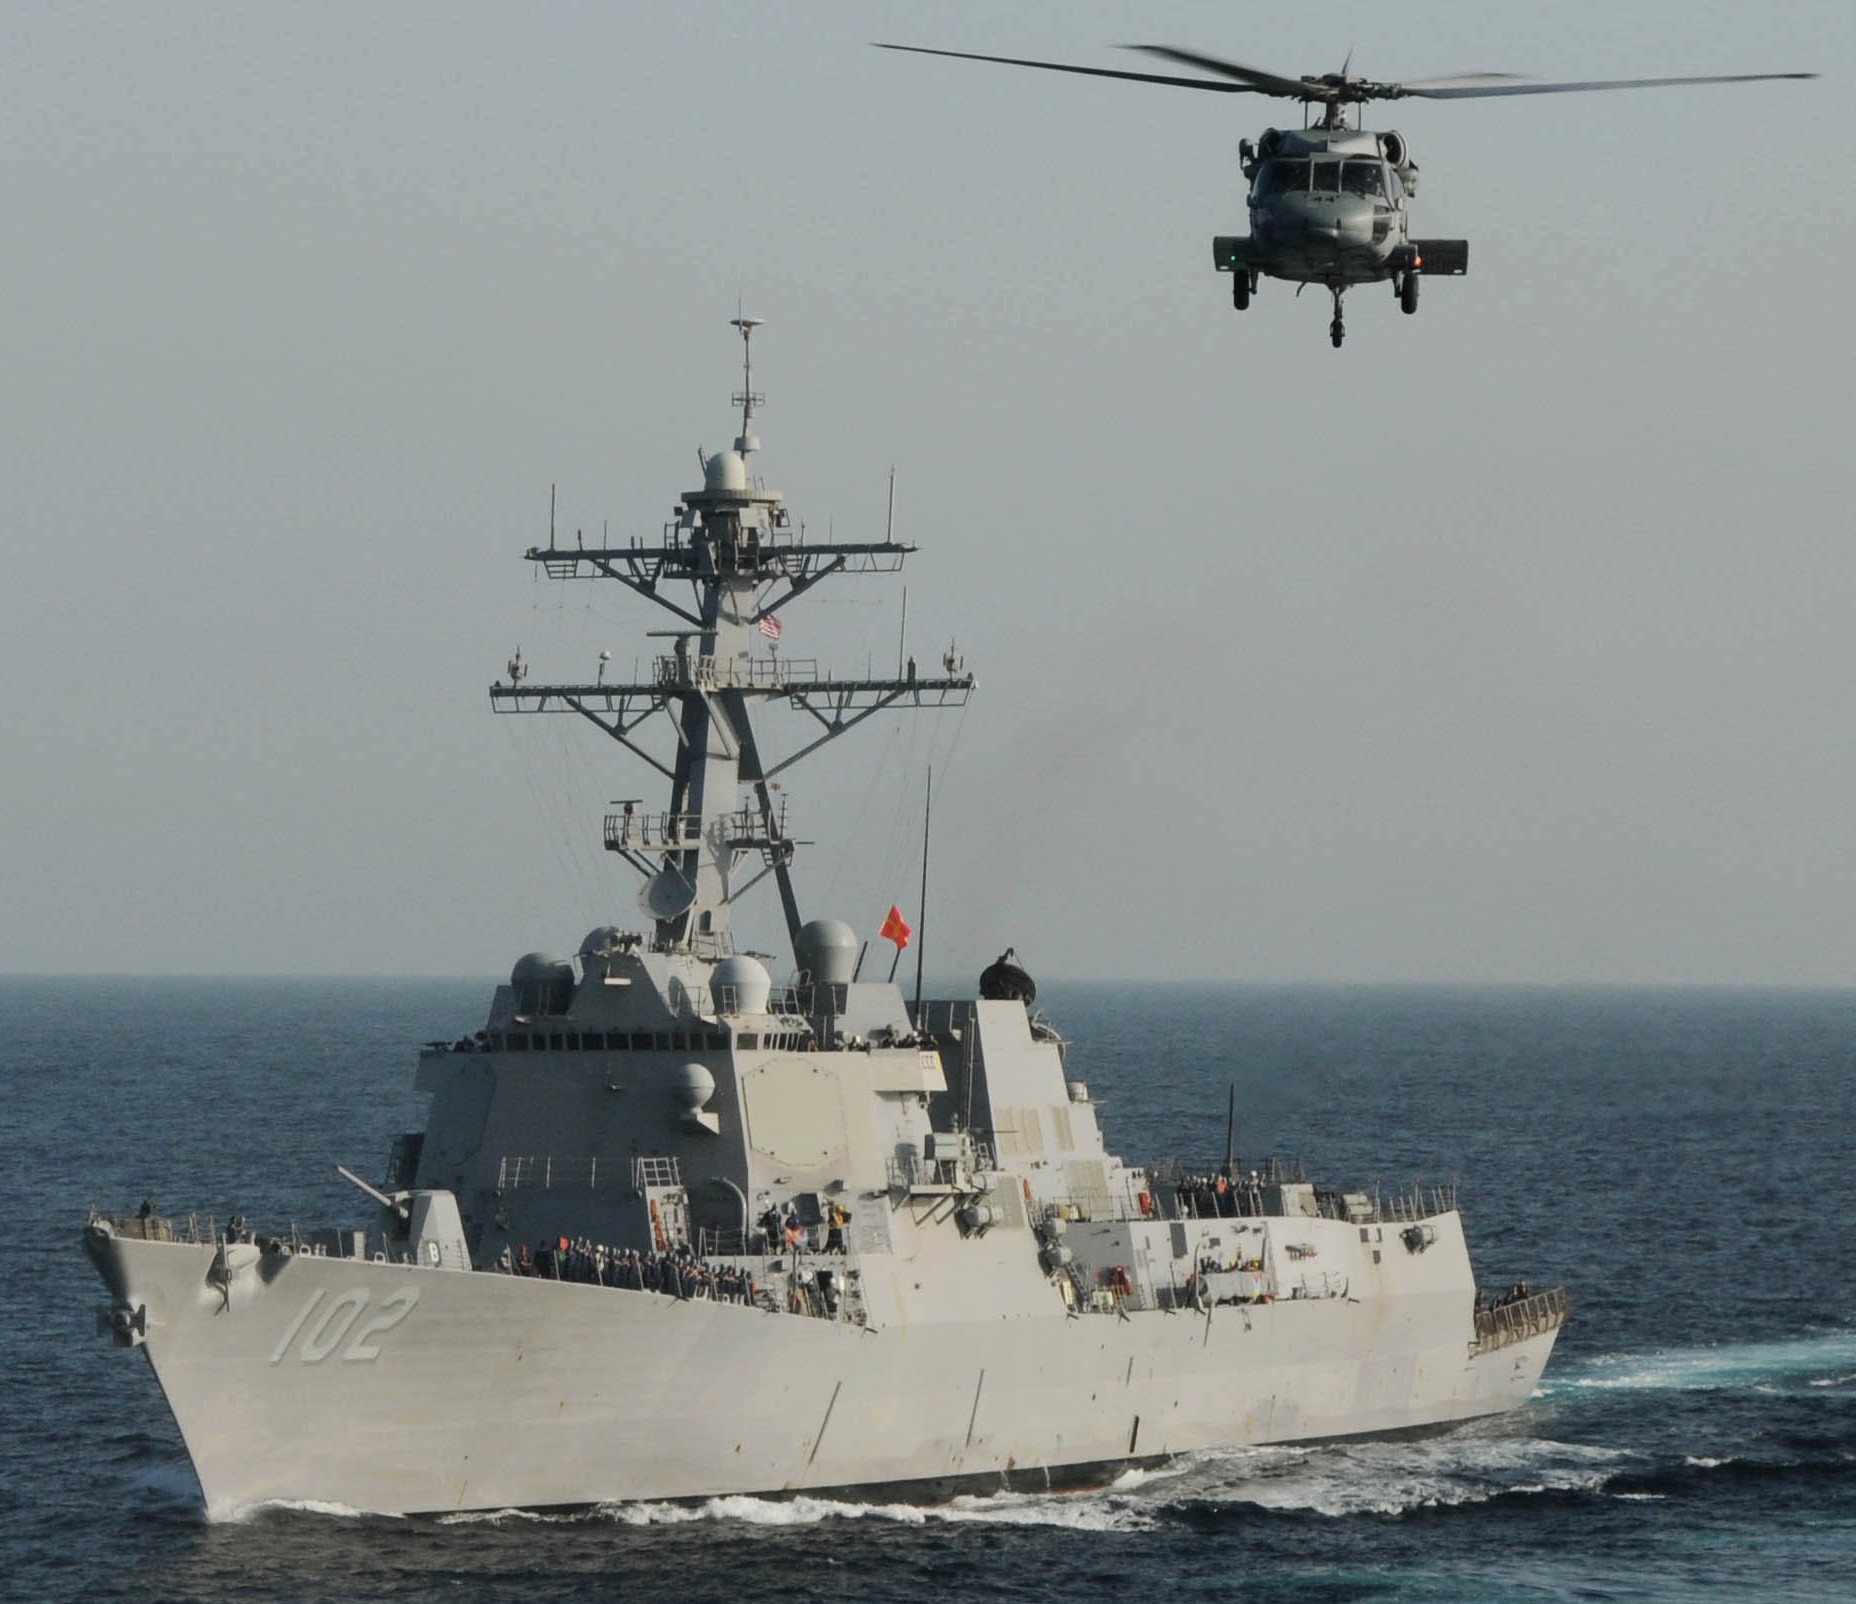 ddg-102 uss sampson arleigh burke class guided missile destroyer aegis us navy gulf of oman 46